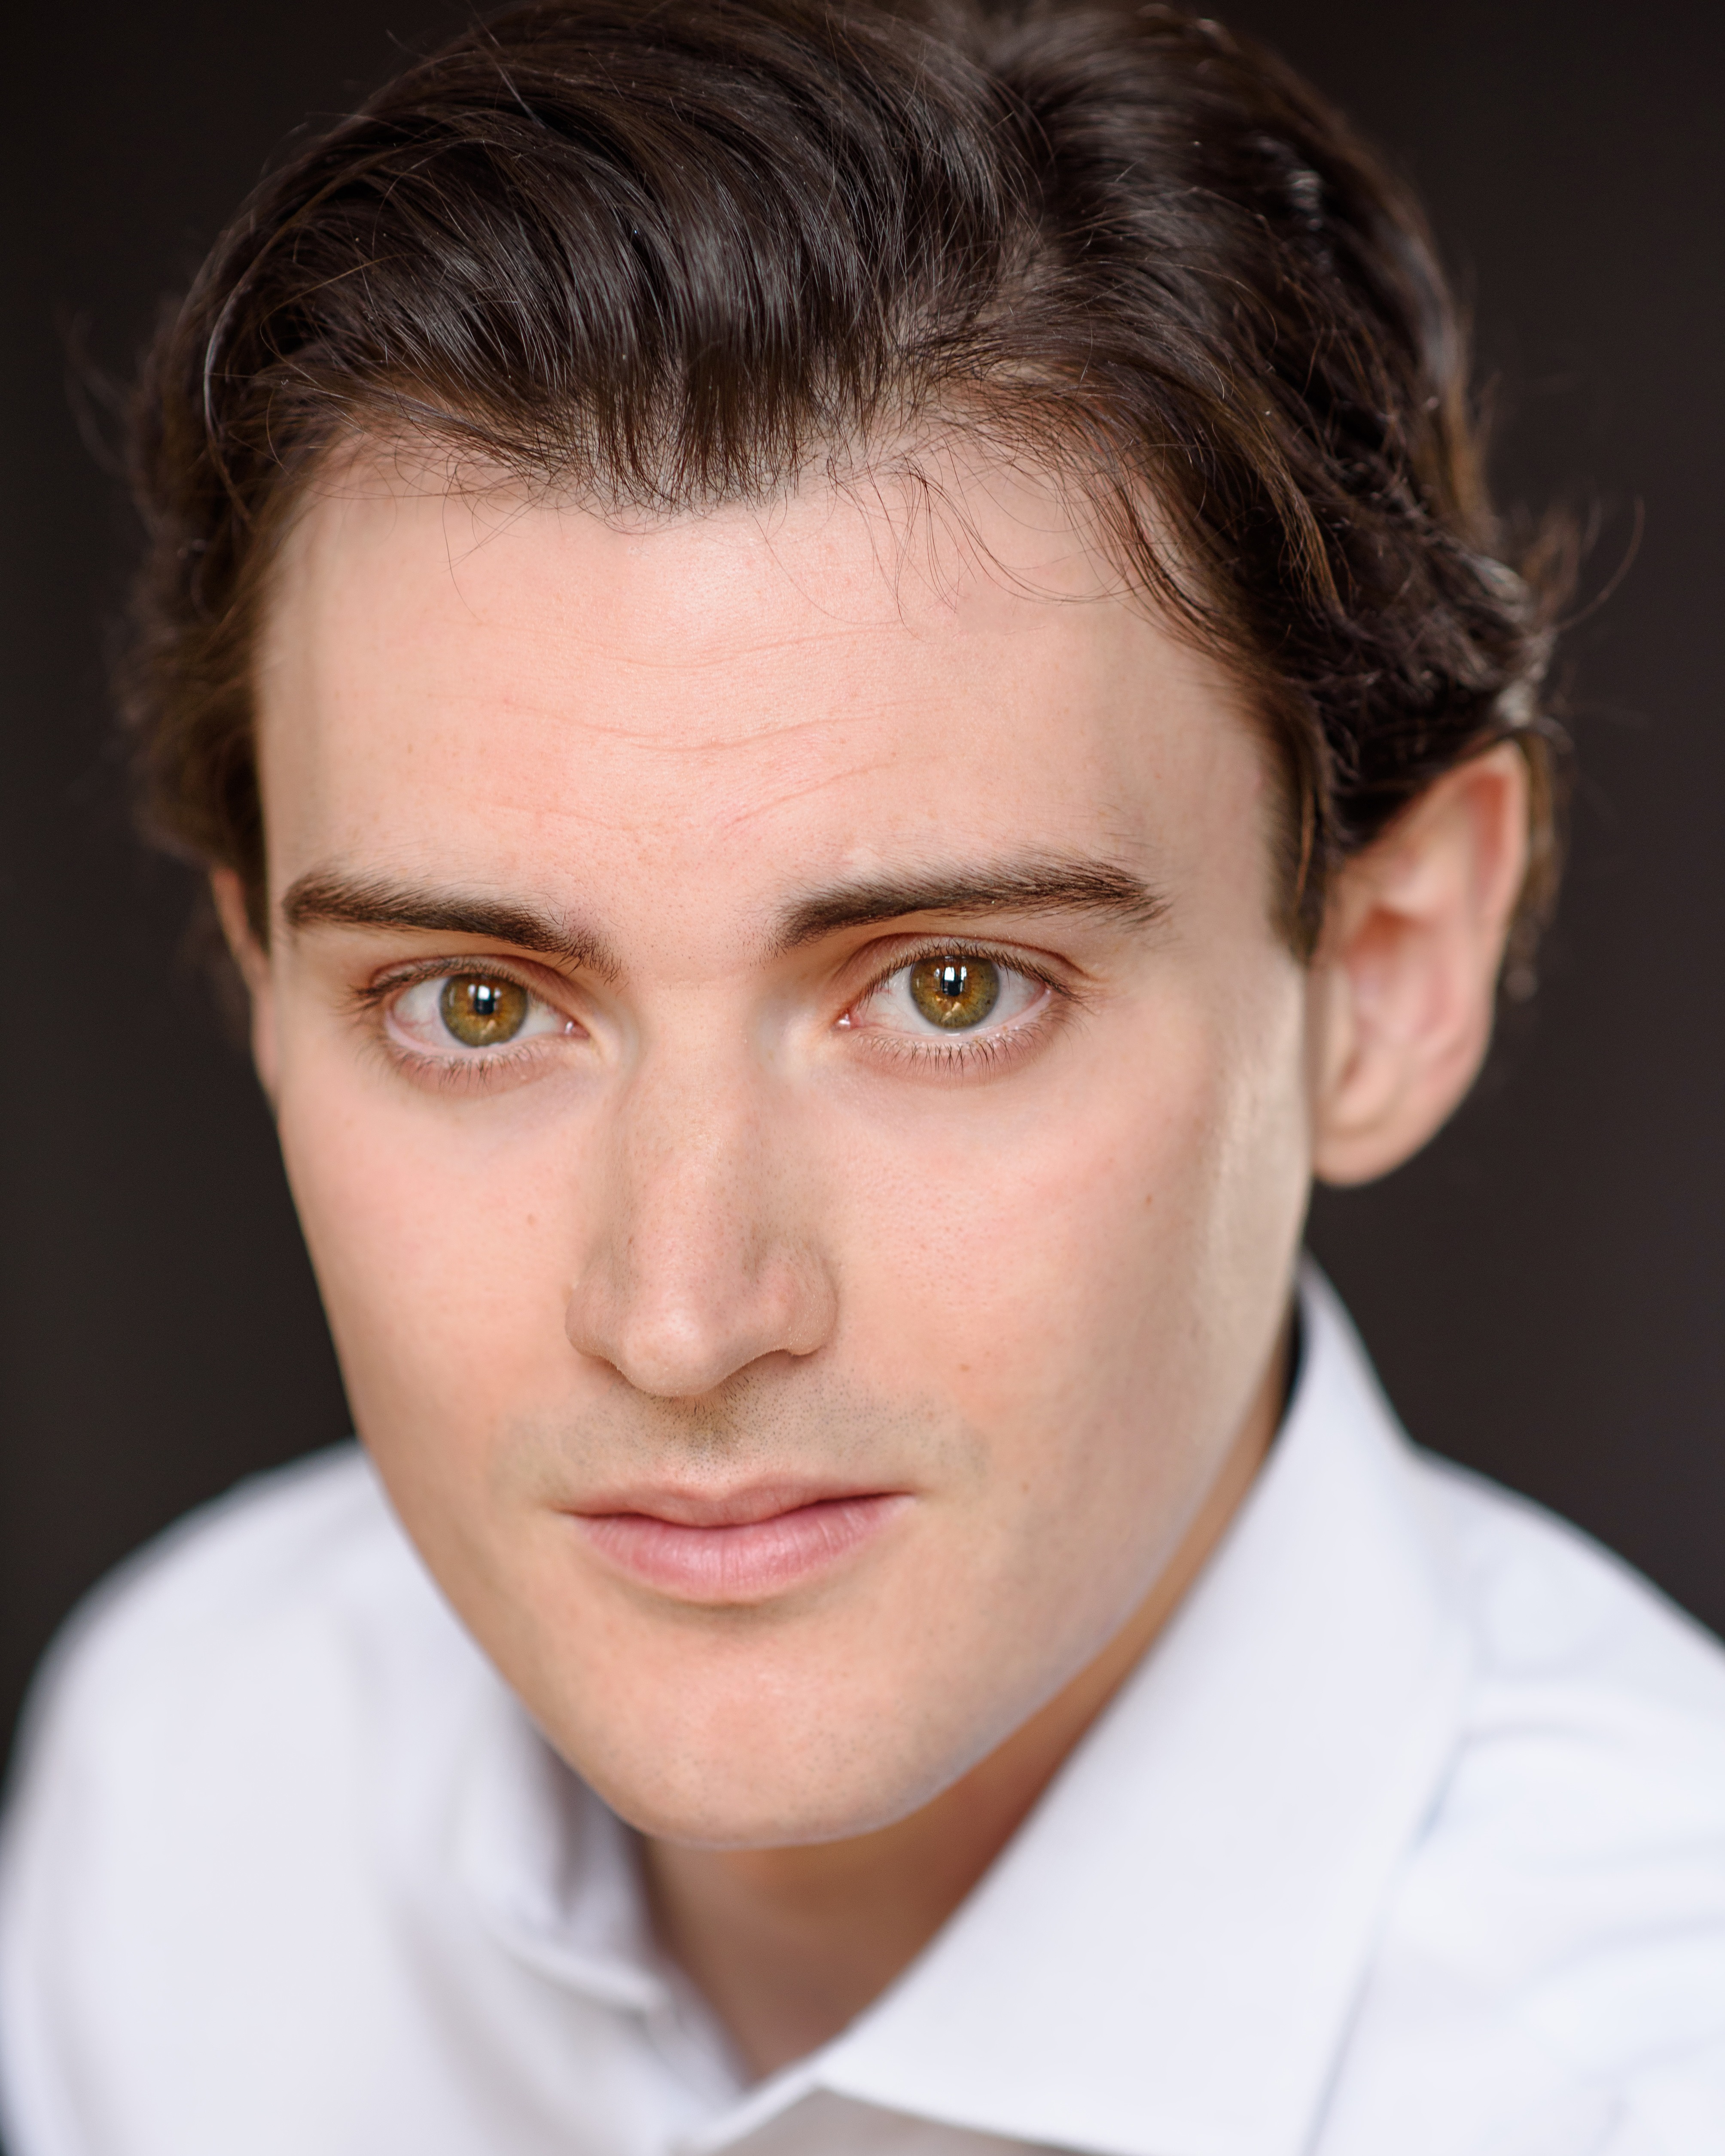 ANDREW MCNEILL - Represented by Jo Hole Associates